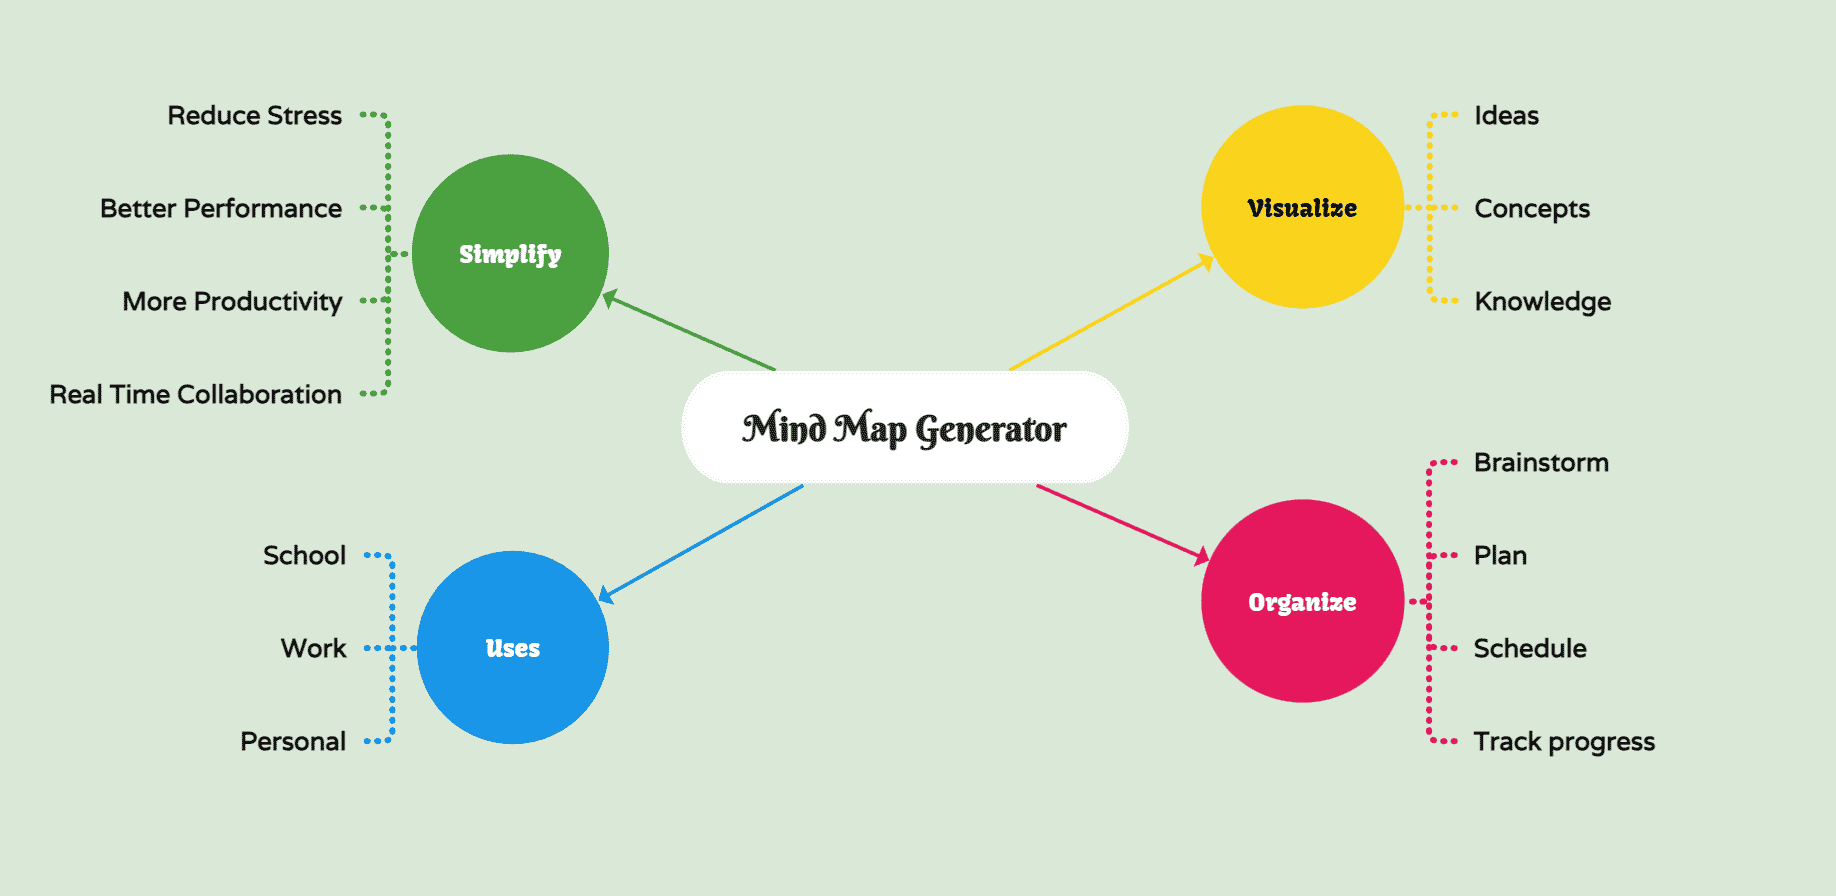 mind map generator uses and reasons to use